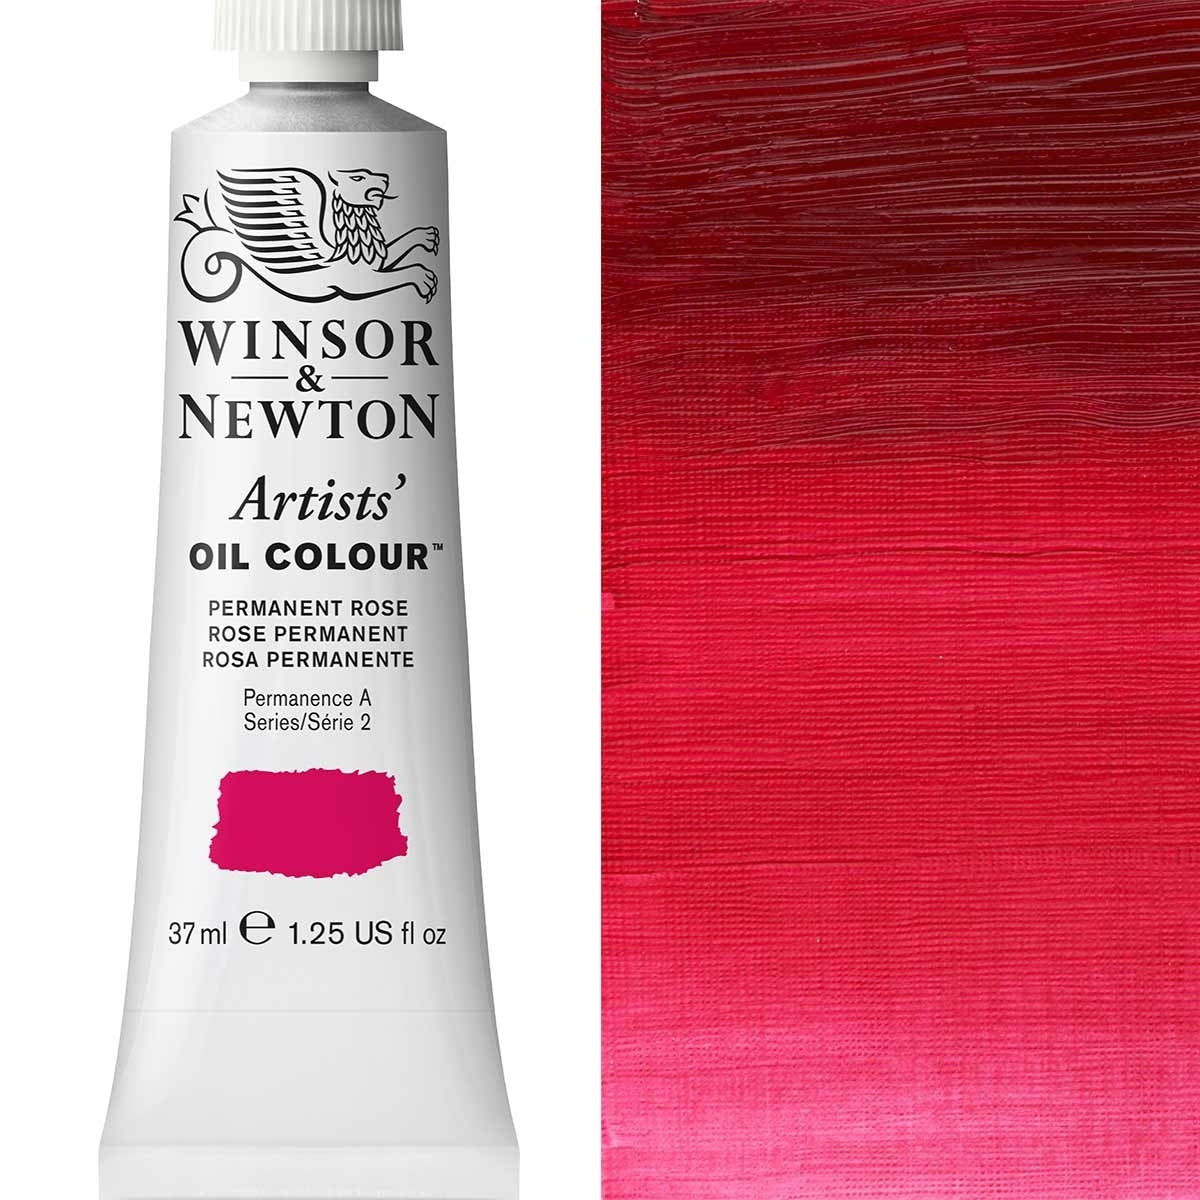 Winsor and Newton - Artists' Oil Colour - 37ml - Permanent Rose